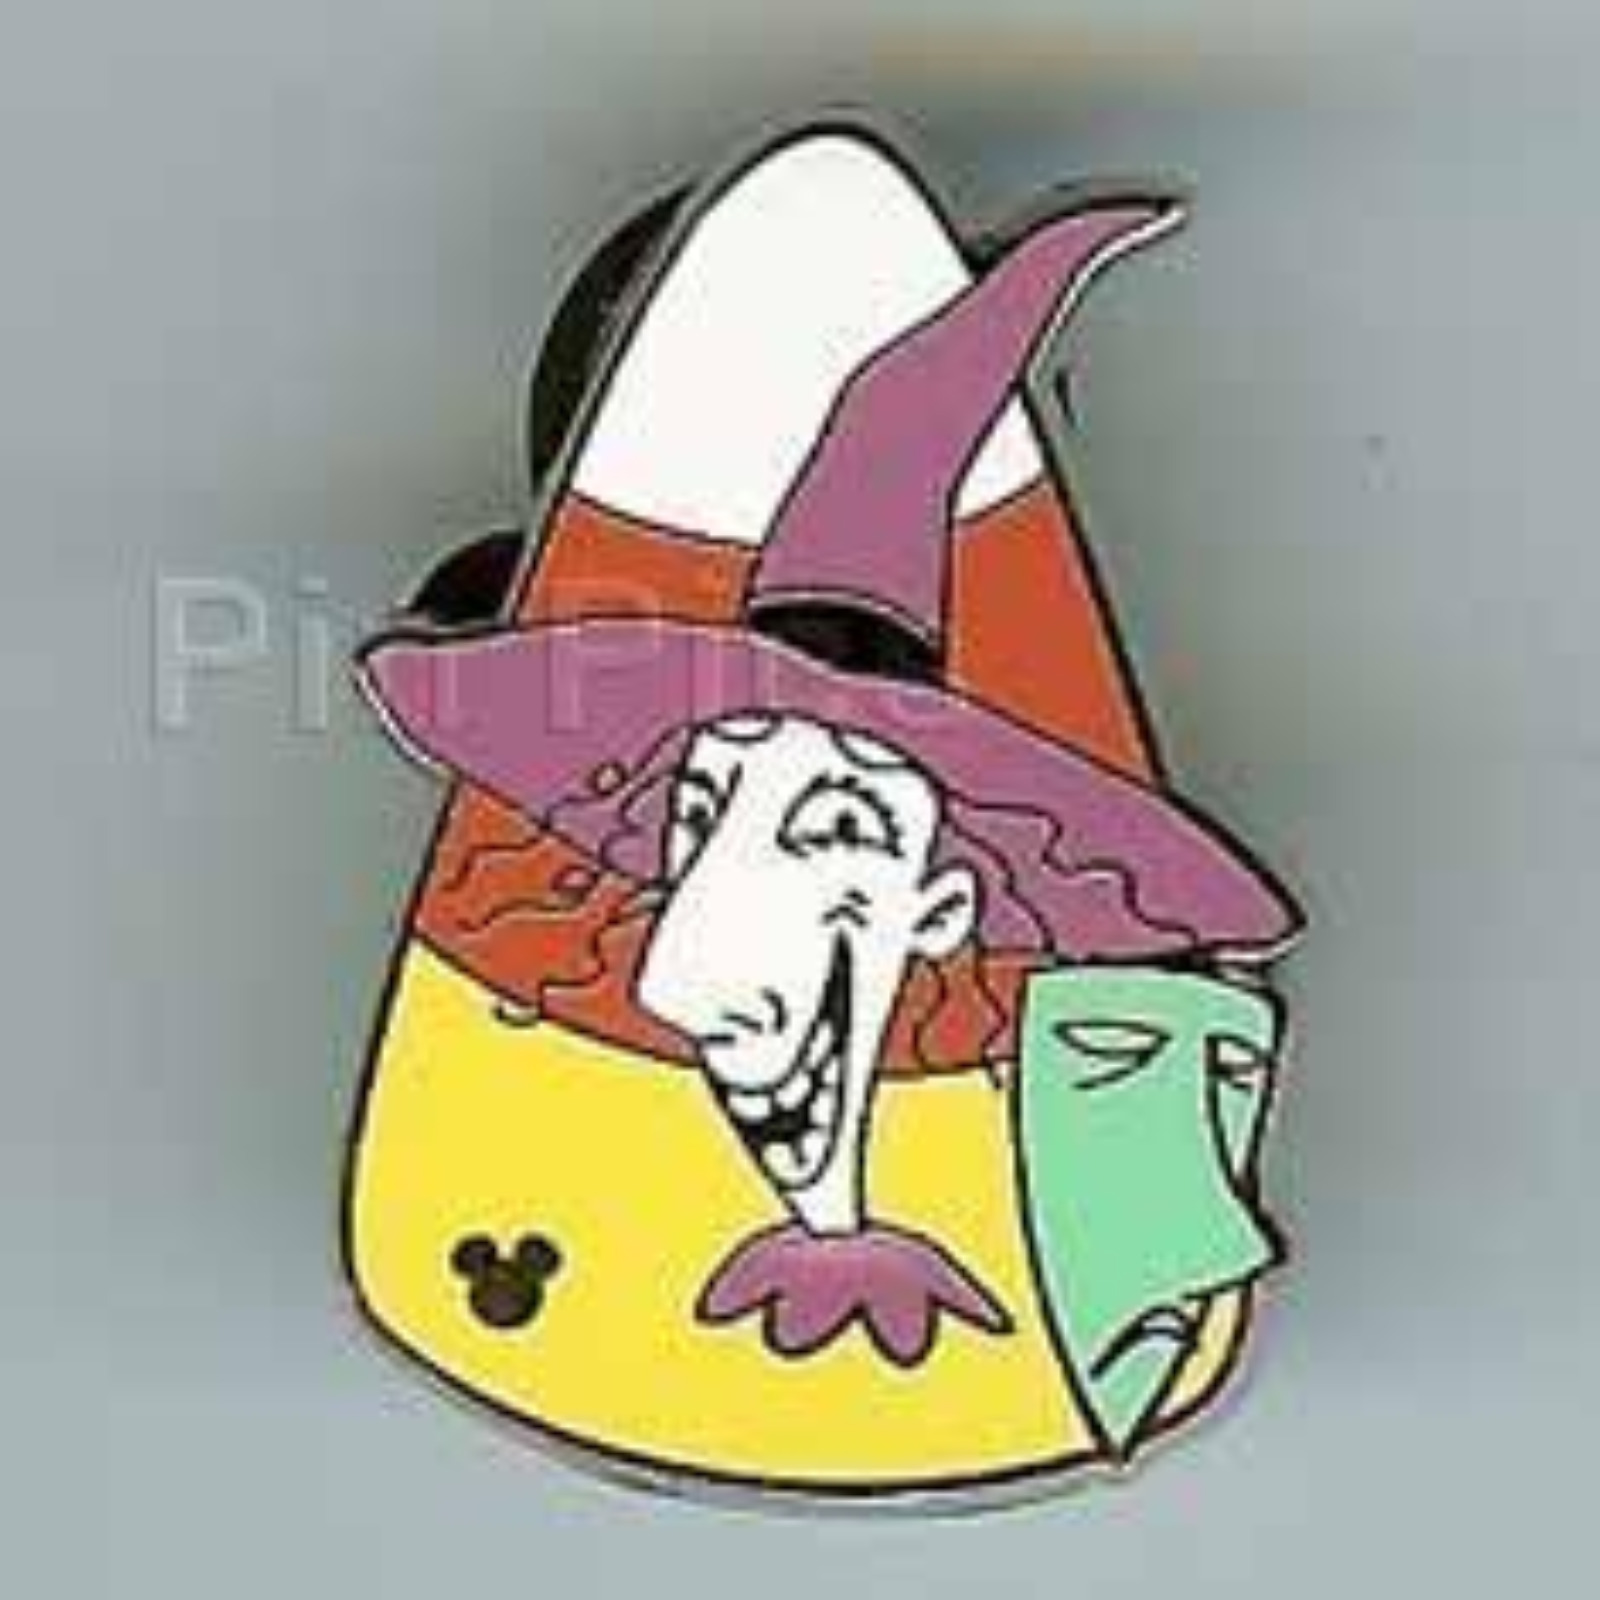 Rare Disney pin 75132 NBC Nightmare Shock Artist Proof LE Only 25 made AP